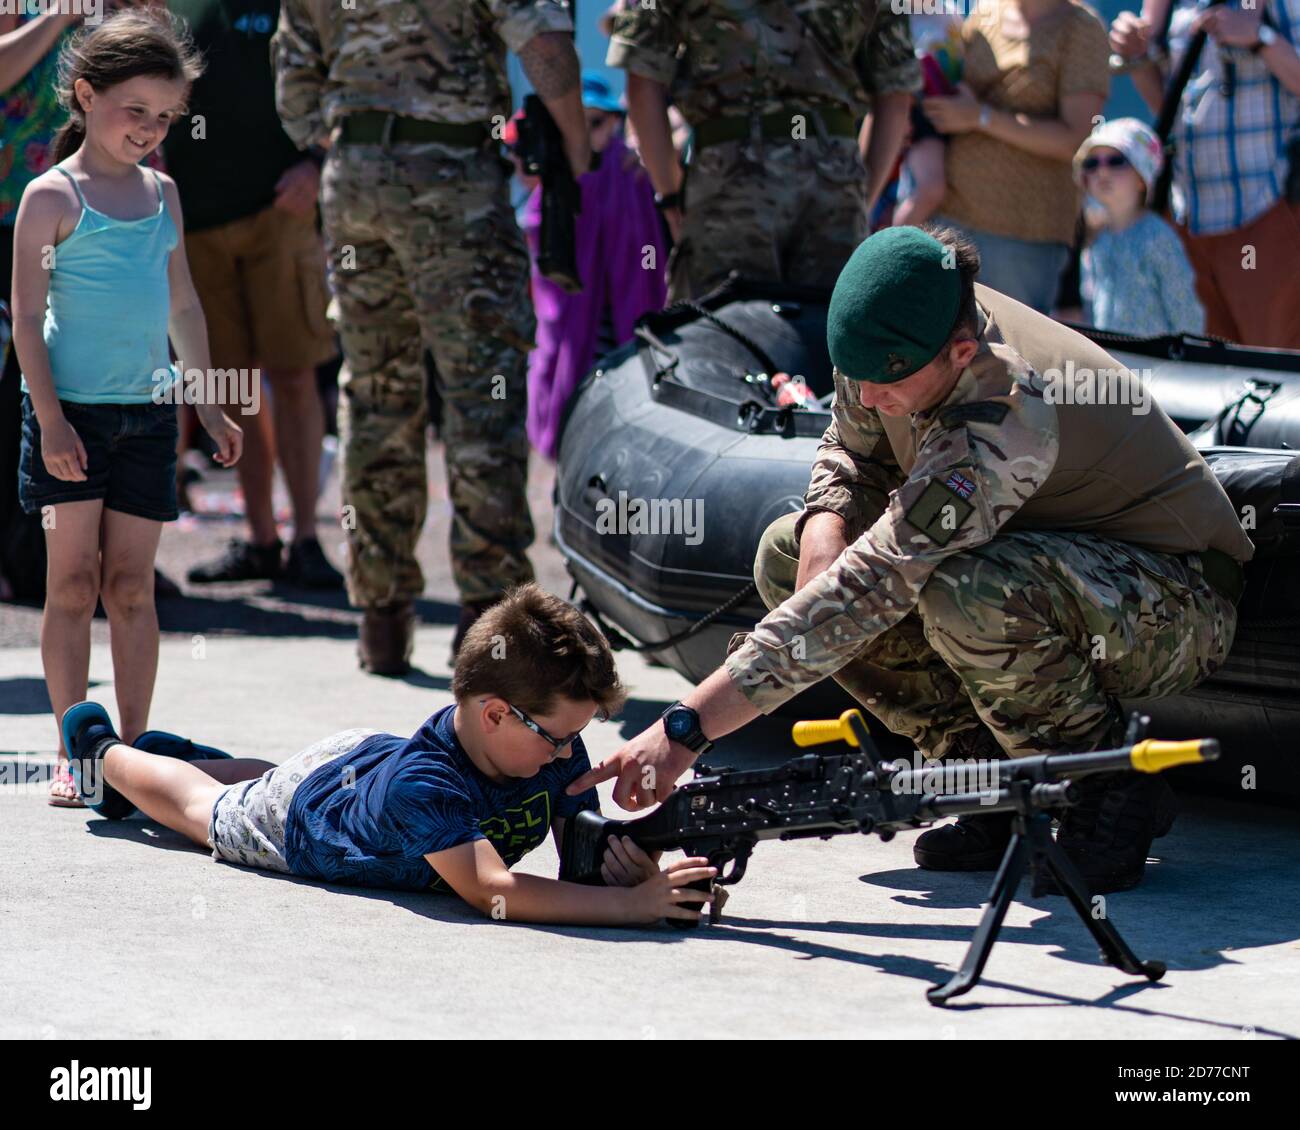 Royal Marine Commando gives advice on using a machine gun to a young boy at their display at the Llandudno Armed Forces Day Stock Photo